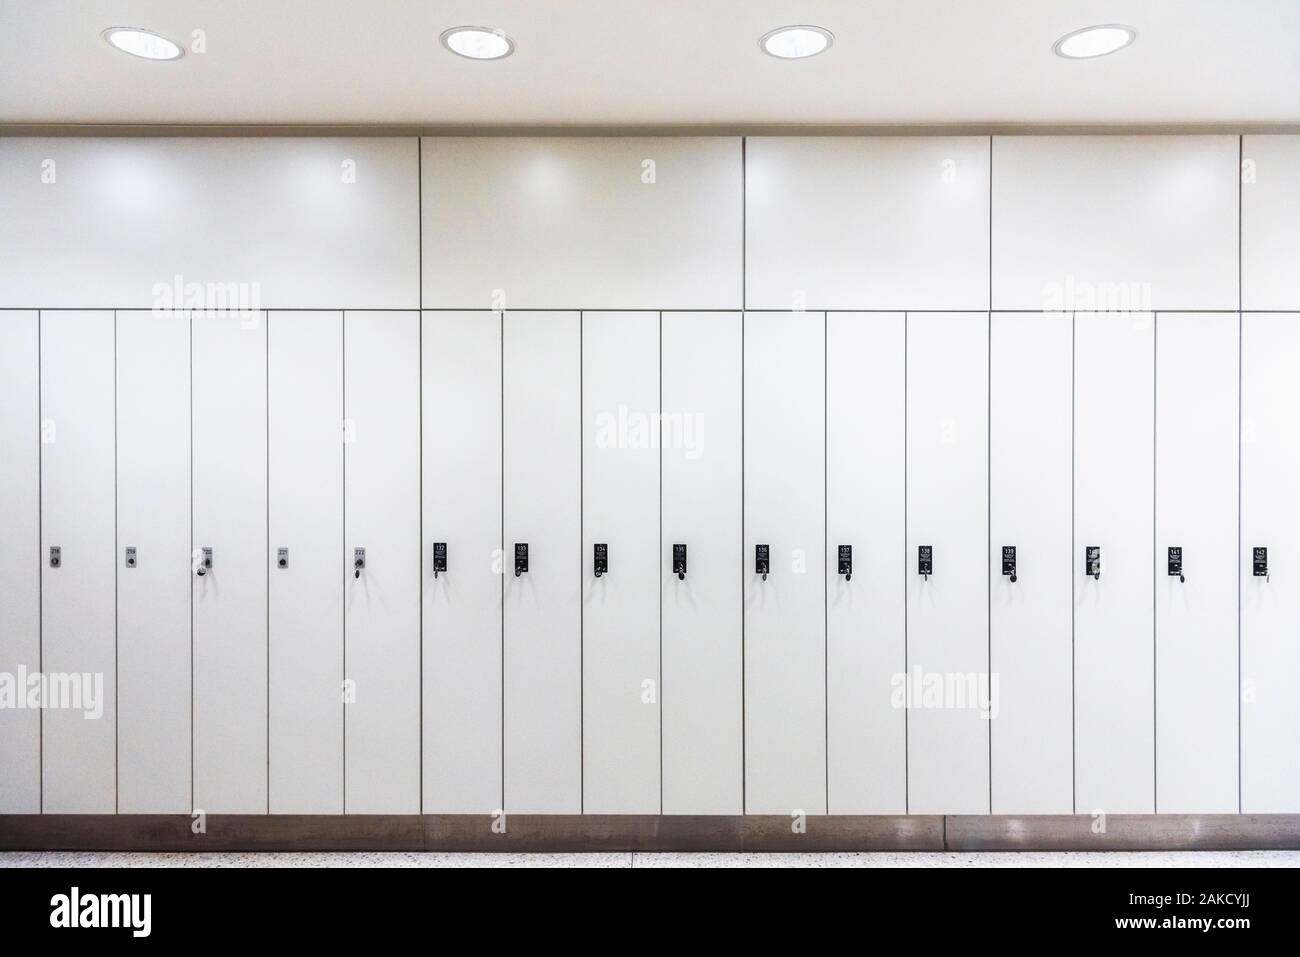 Luxury lookers in a row, in artificial light. White metal wardrobes. Cloakroom with white lockers. Back to school context. Dressing room interior. Stock Photo